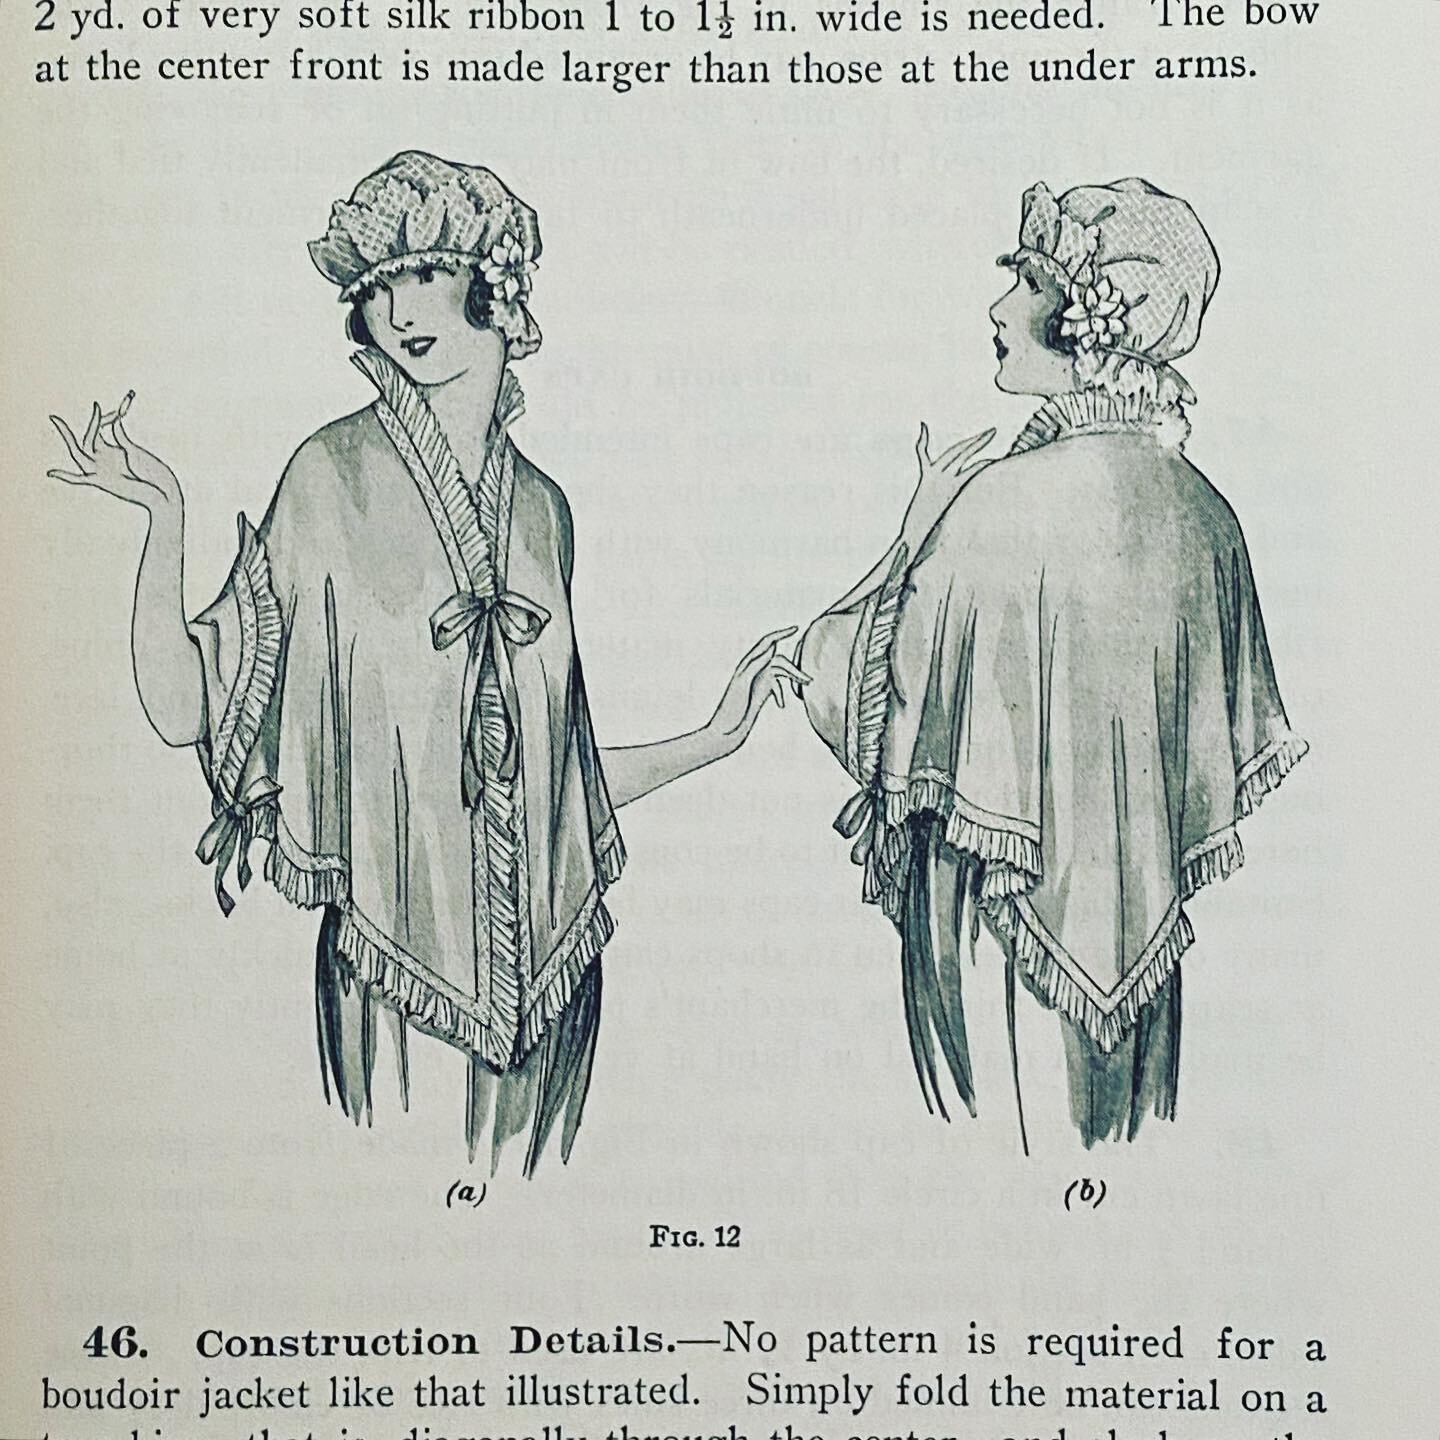 Boudoir jacket and lace cap. &lsquo;Maternity and Infants&rsquo; Garments,&rsquo; Women&rsquo;s Institute of Domestic Arts &amp; Sciences, 1917. 
#fashionhistory #dresshistory #maternityfashion #vintagematernity #1910s